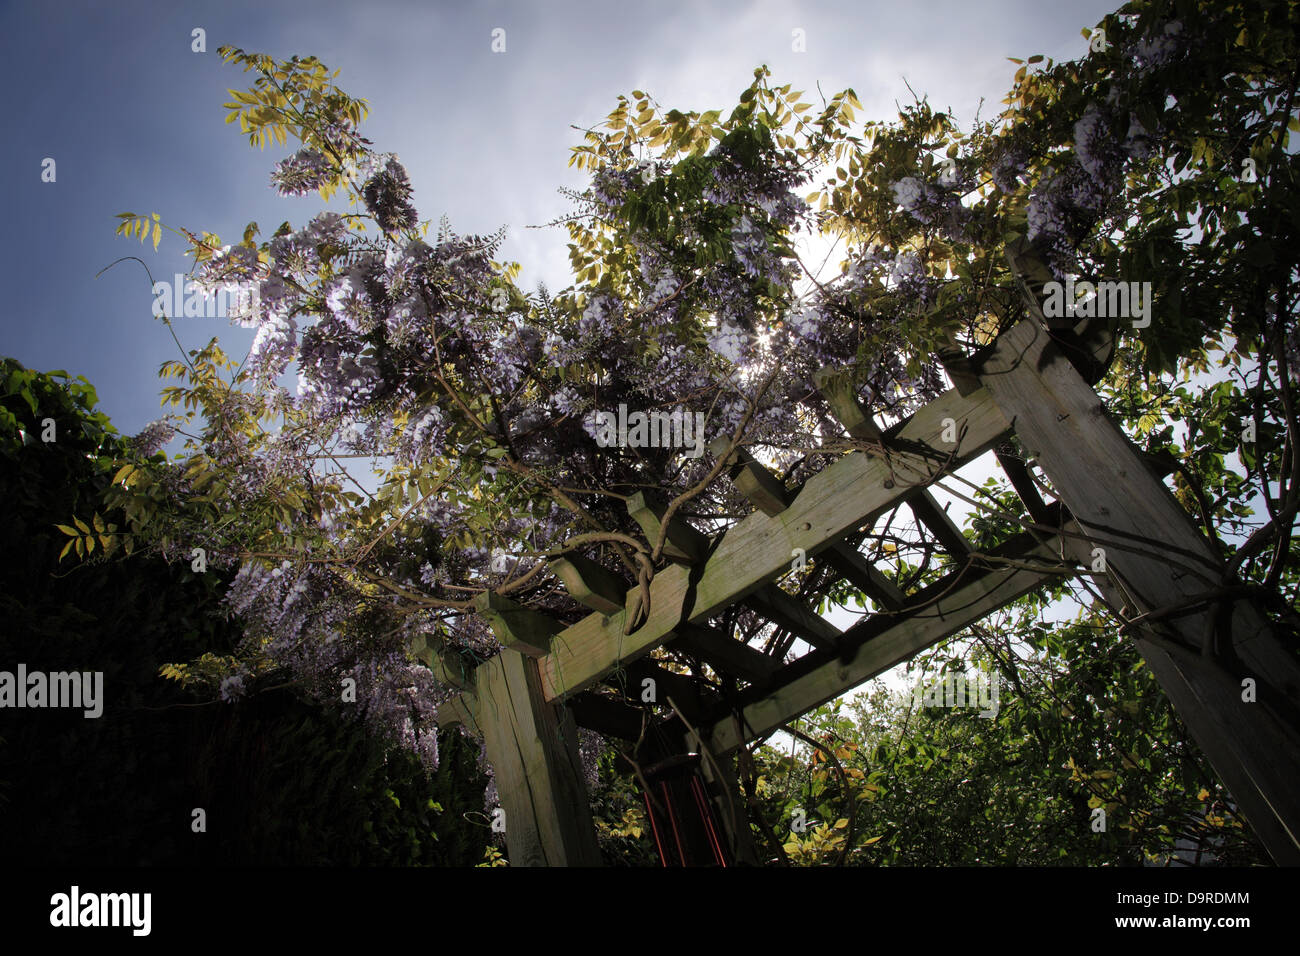 Wisteria growing over an archway. Wisteria is a genus of flowering plants in the pea family, Fabaceae, Stock Photo